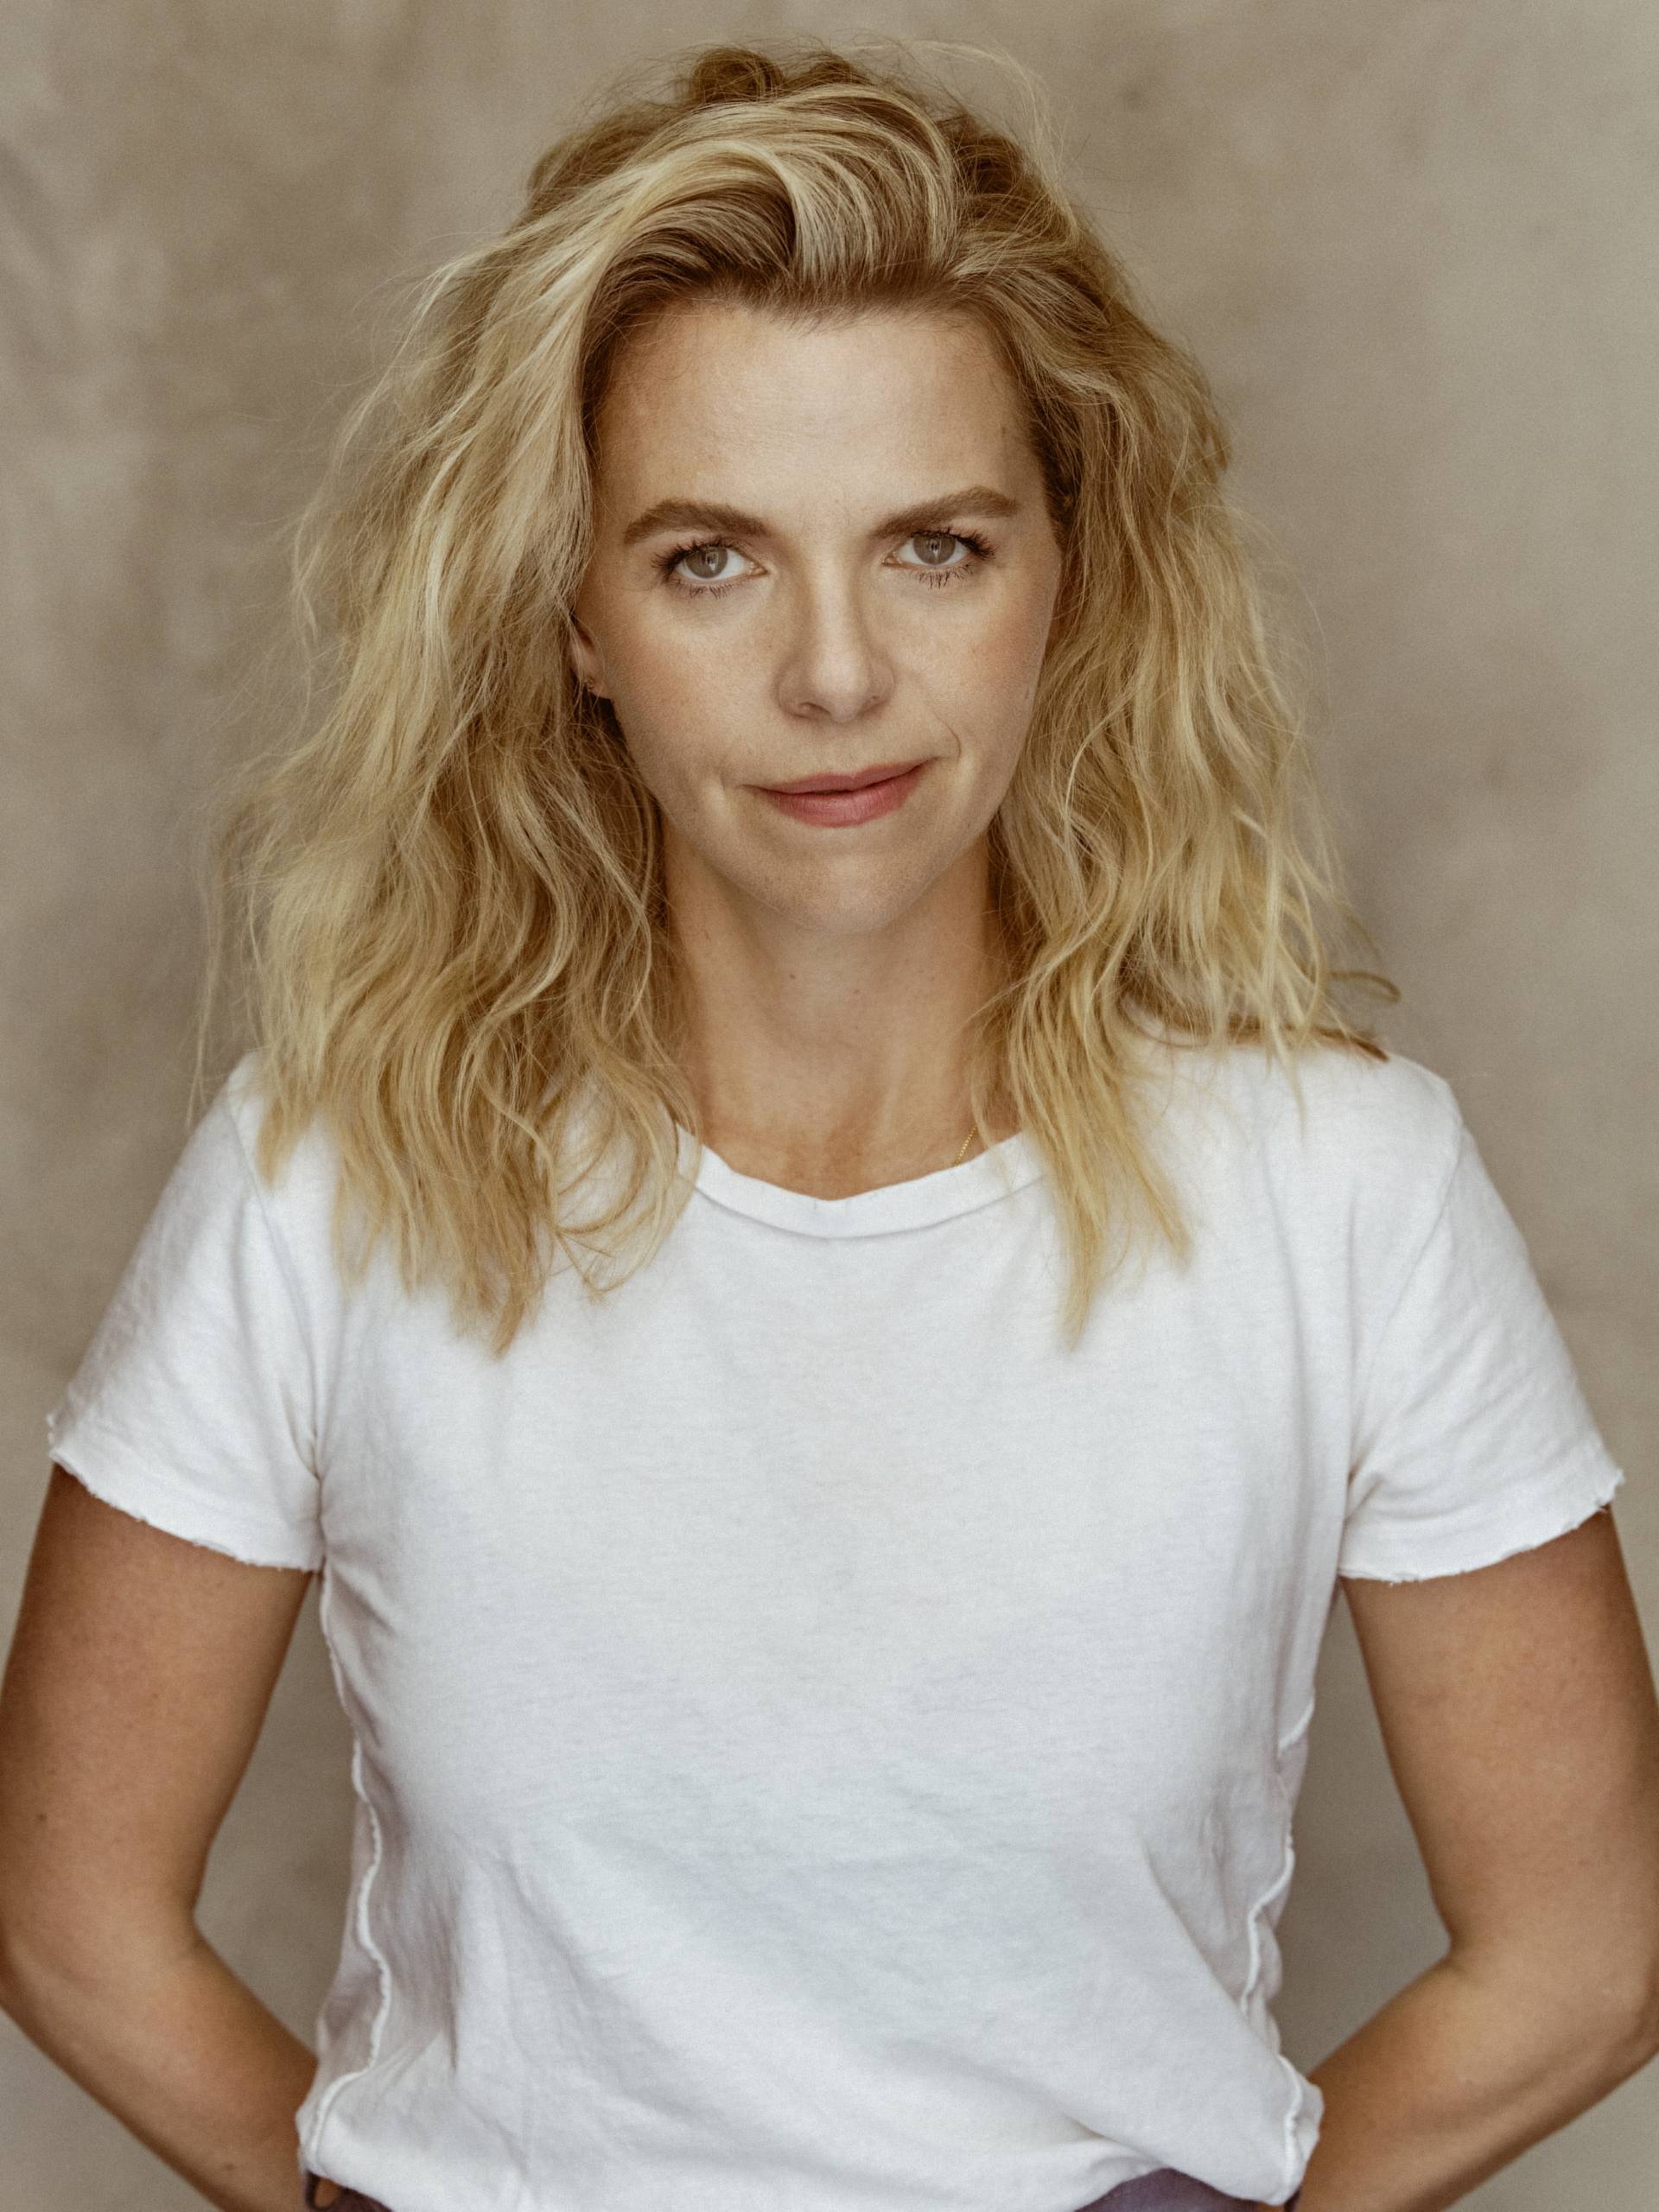 white woman in white shirt standing in front of a beige background